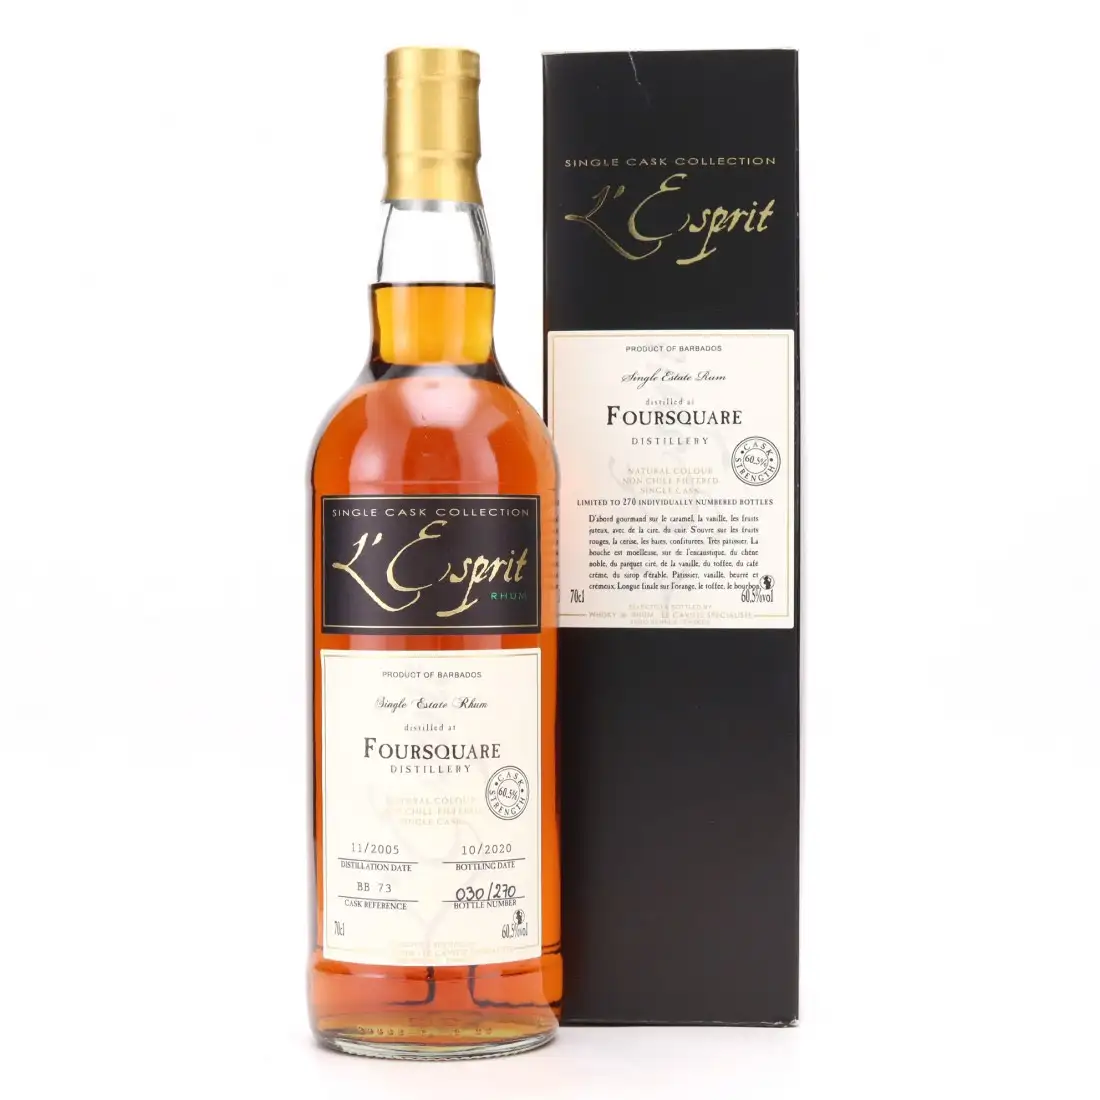 Image of the front of the bottle of the rum L‘Esprit